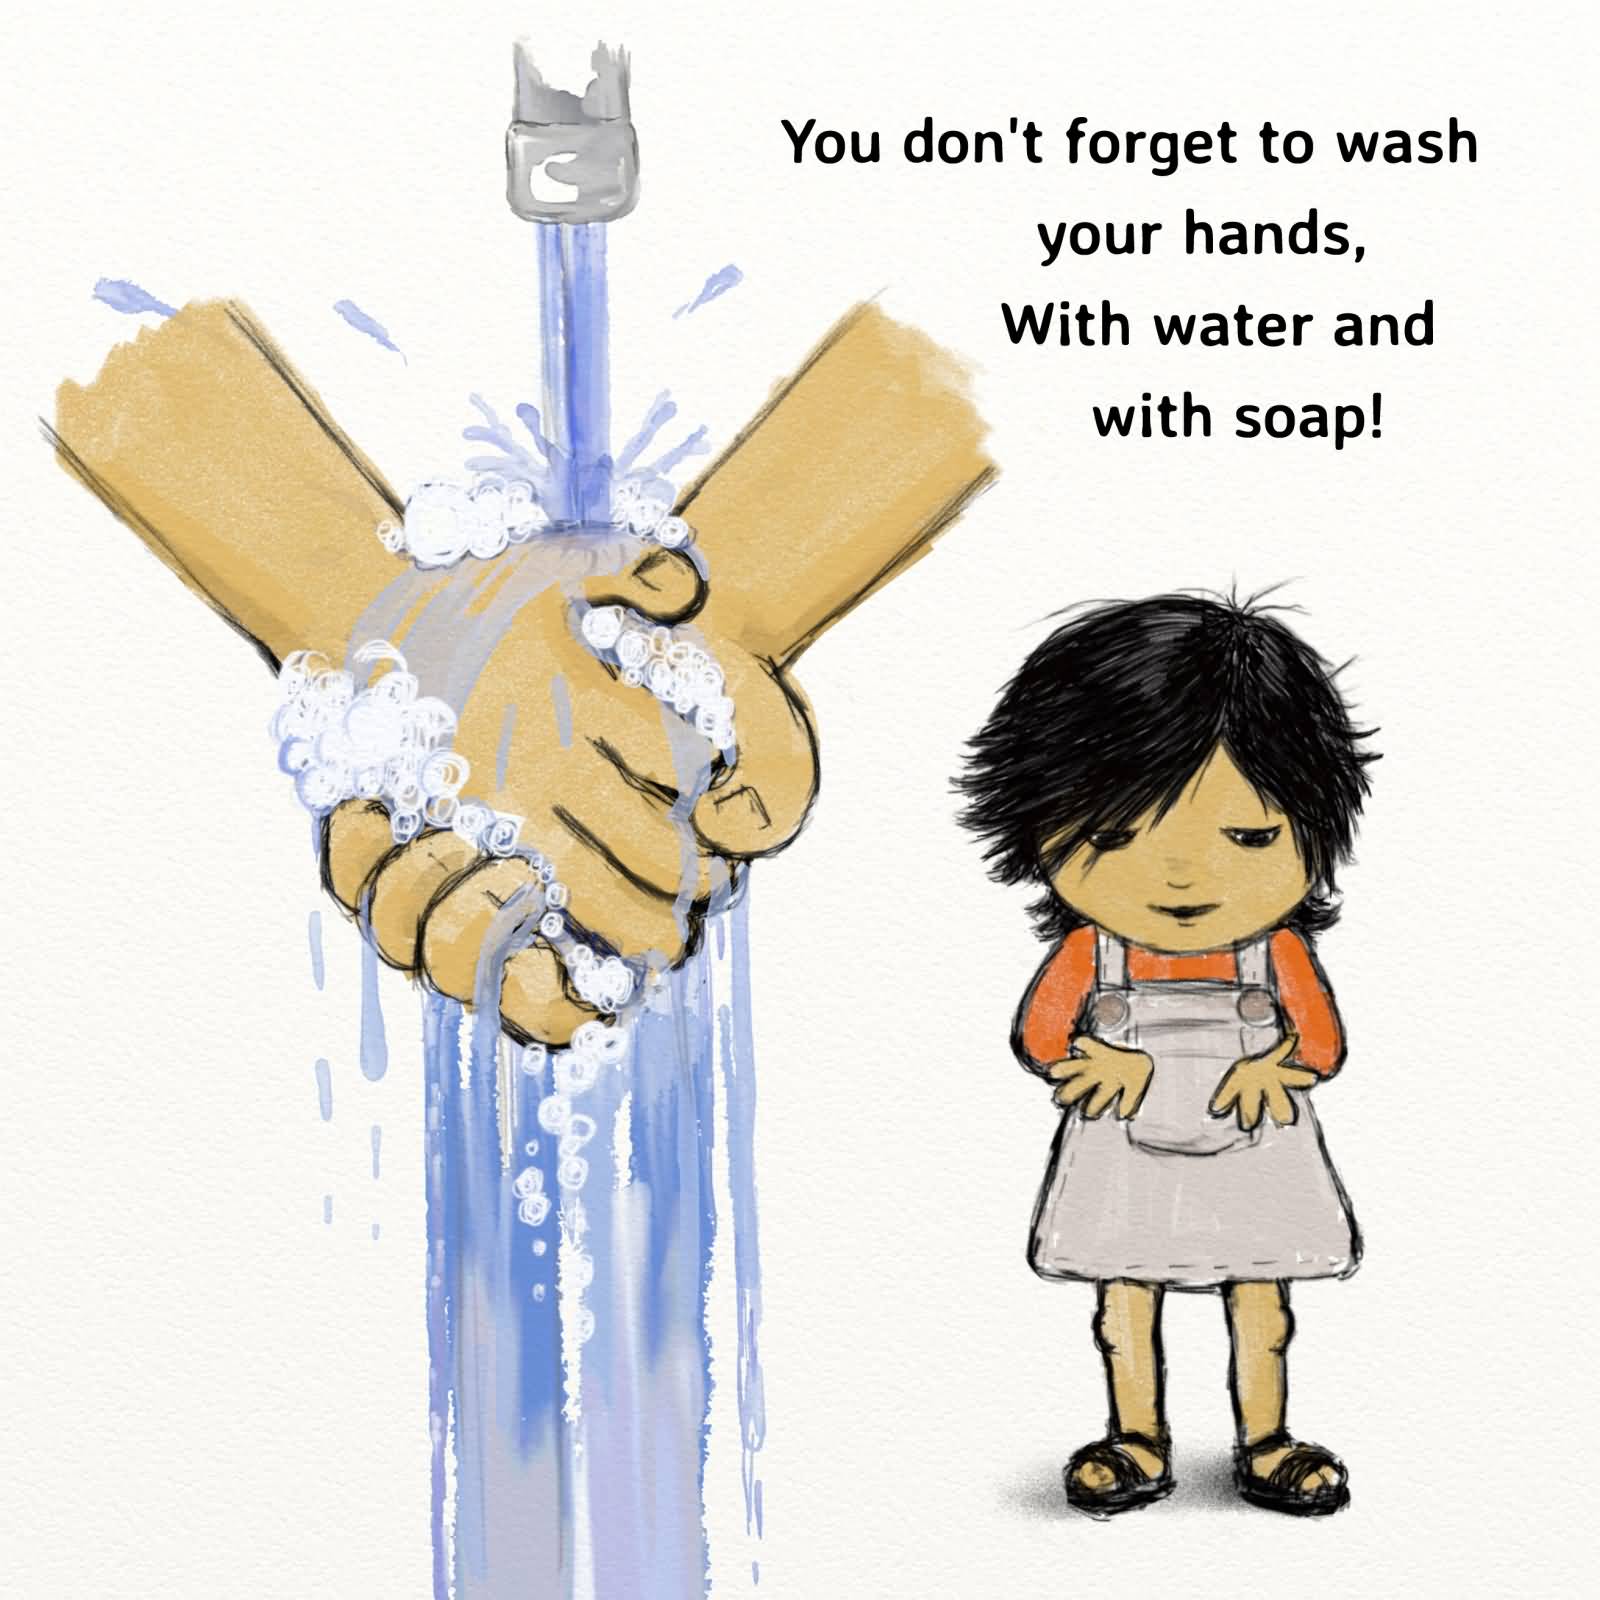 You Don't Forget To Wash Your Hands, With Water And With Soap Global Handwashing Day